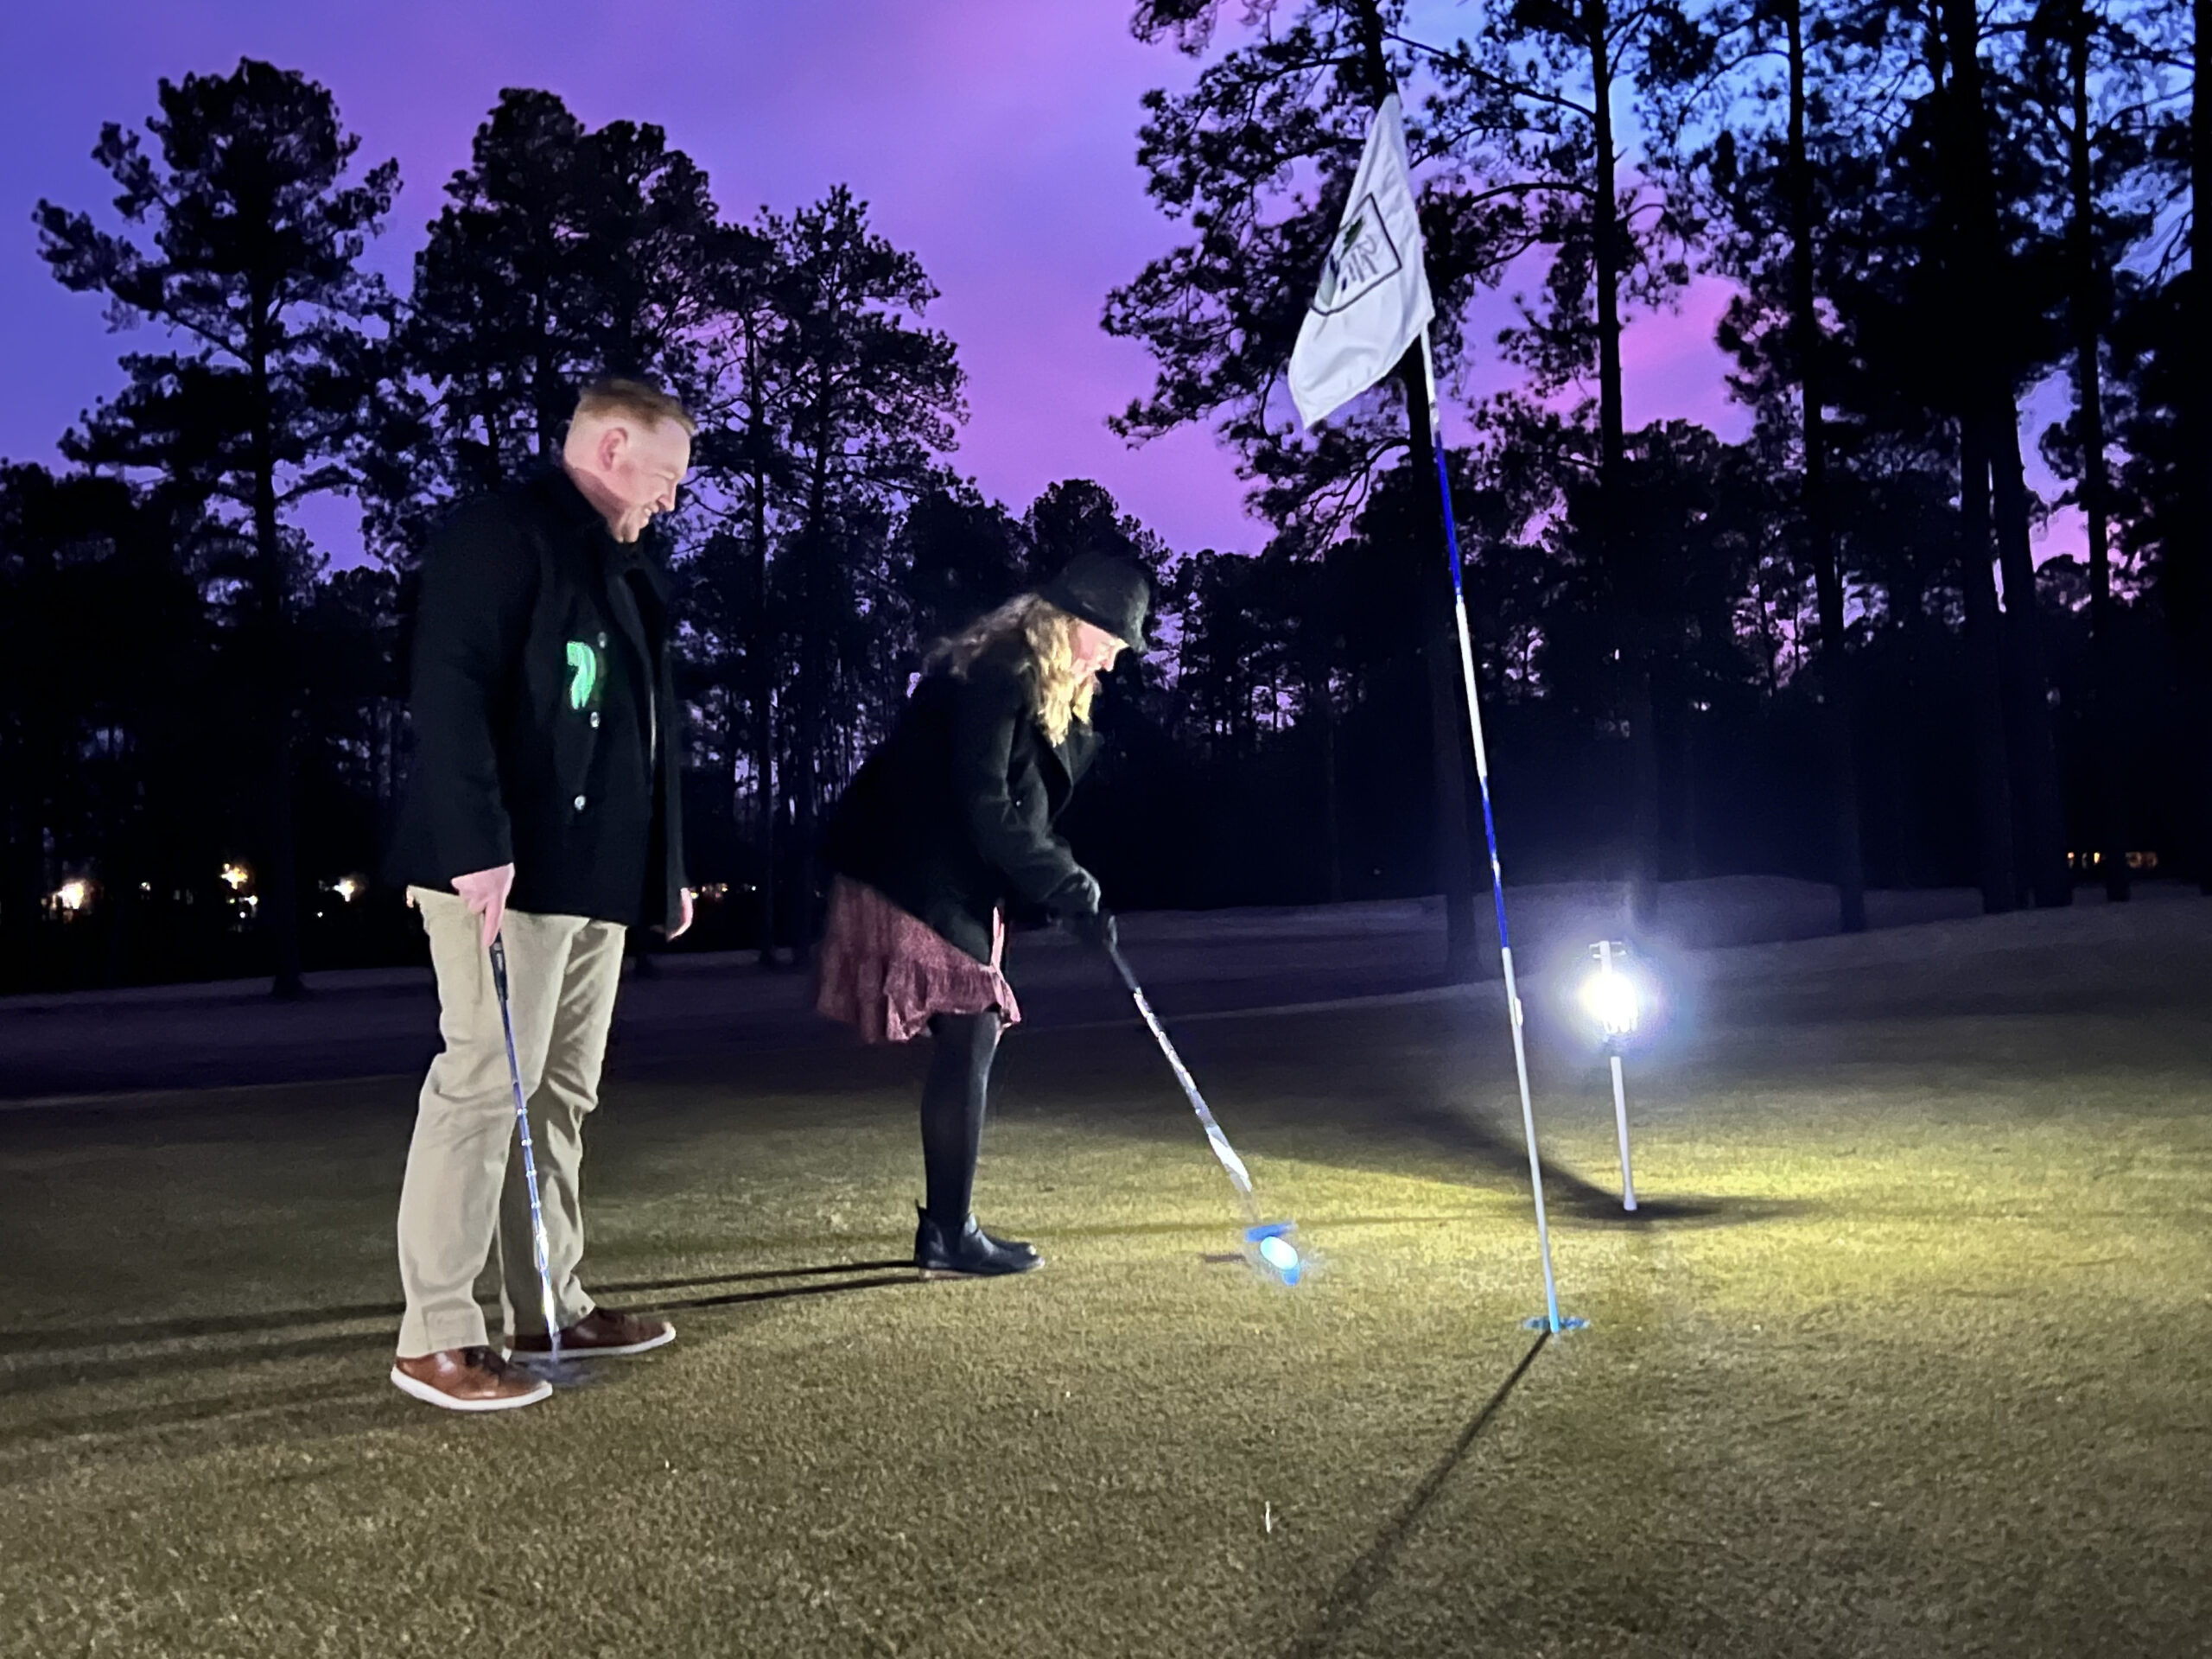 A couple putting on greens lit by lanterns during the Hearts & Clubs sweetheart putt-putt date